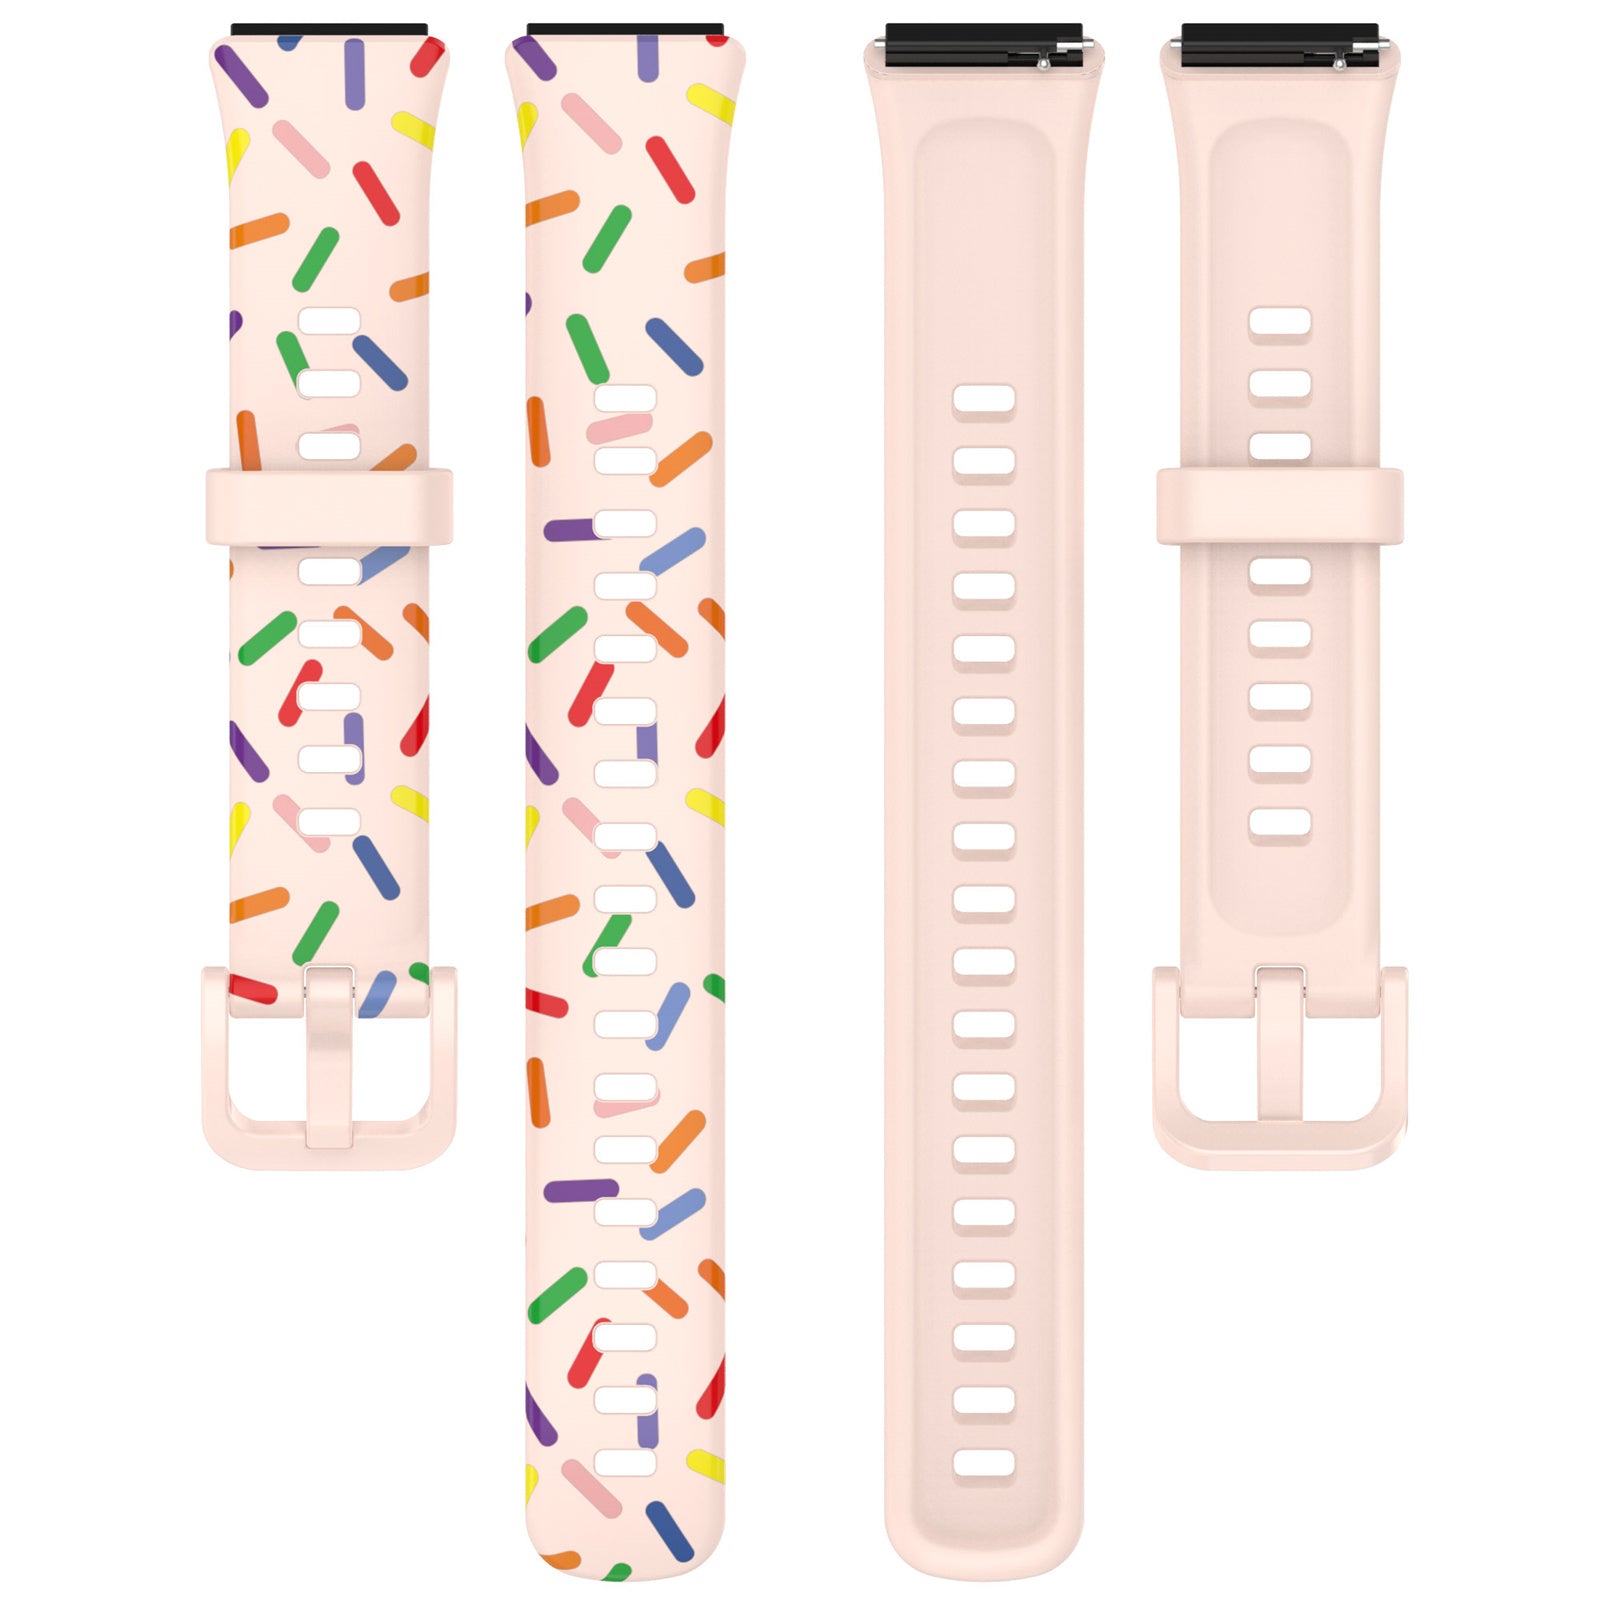 Uniqkart for Huawei Band 7 Colorful Spotted Wrist Band Replacement Silicone Watch Strap - Light Pink